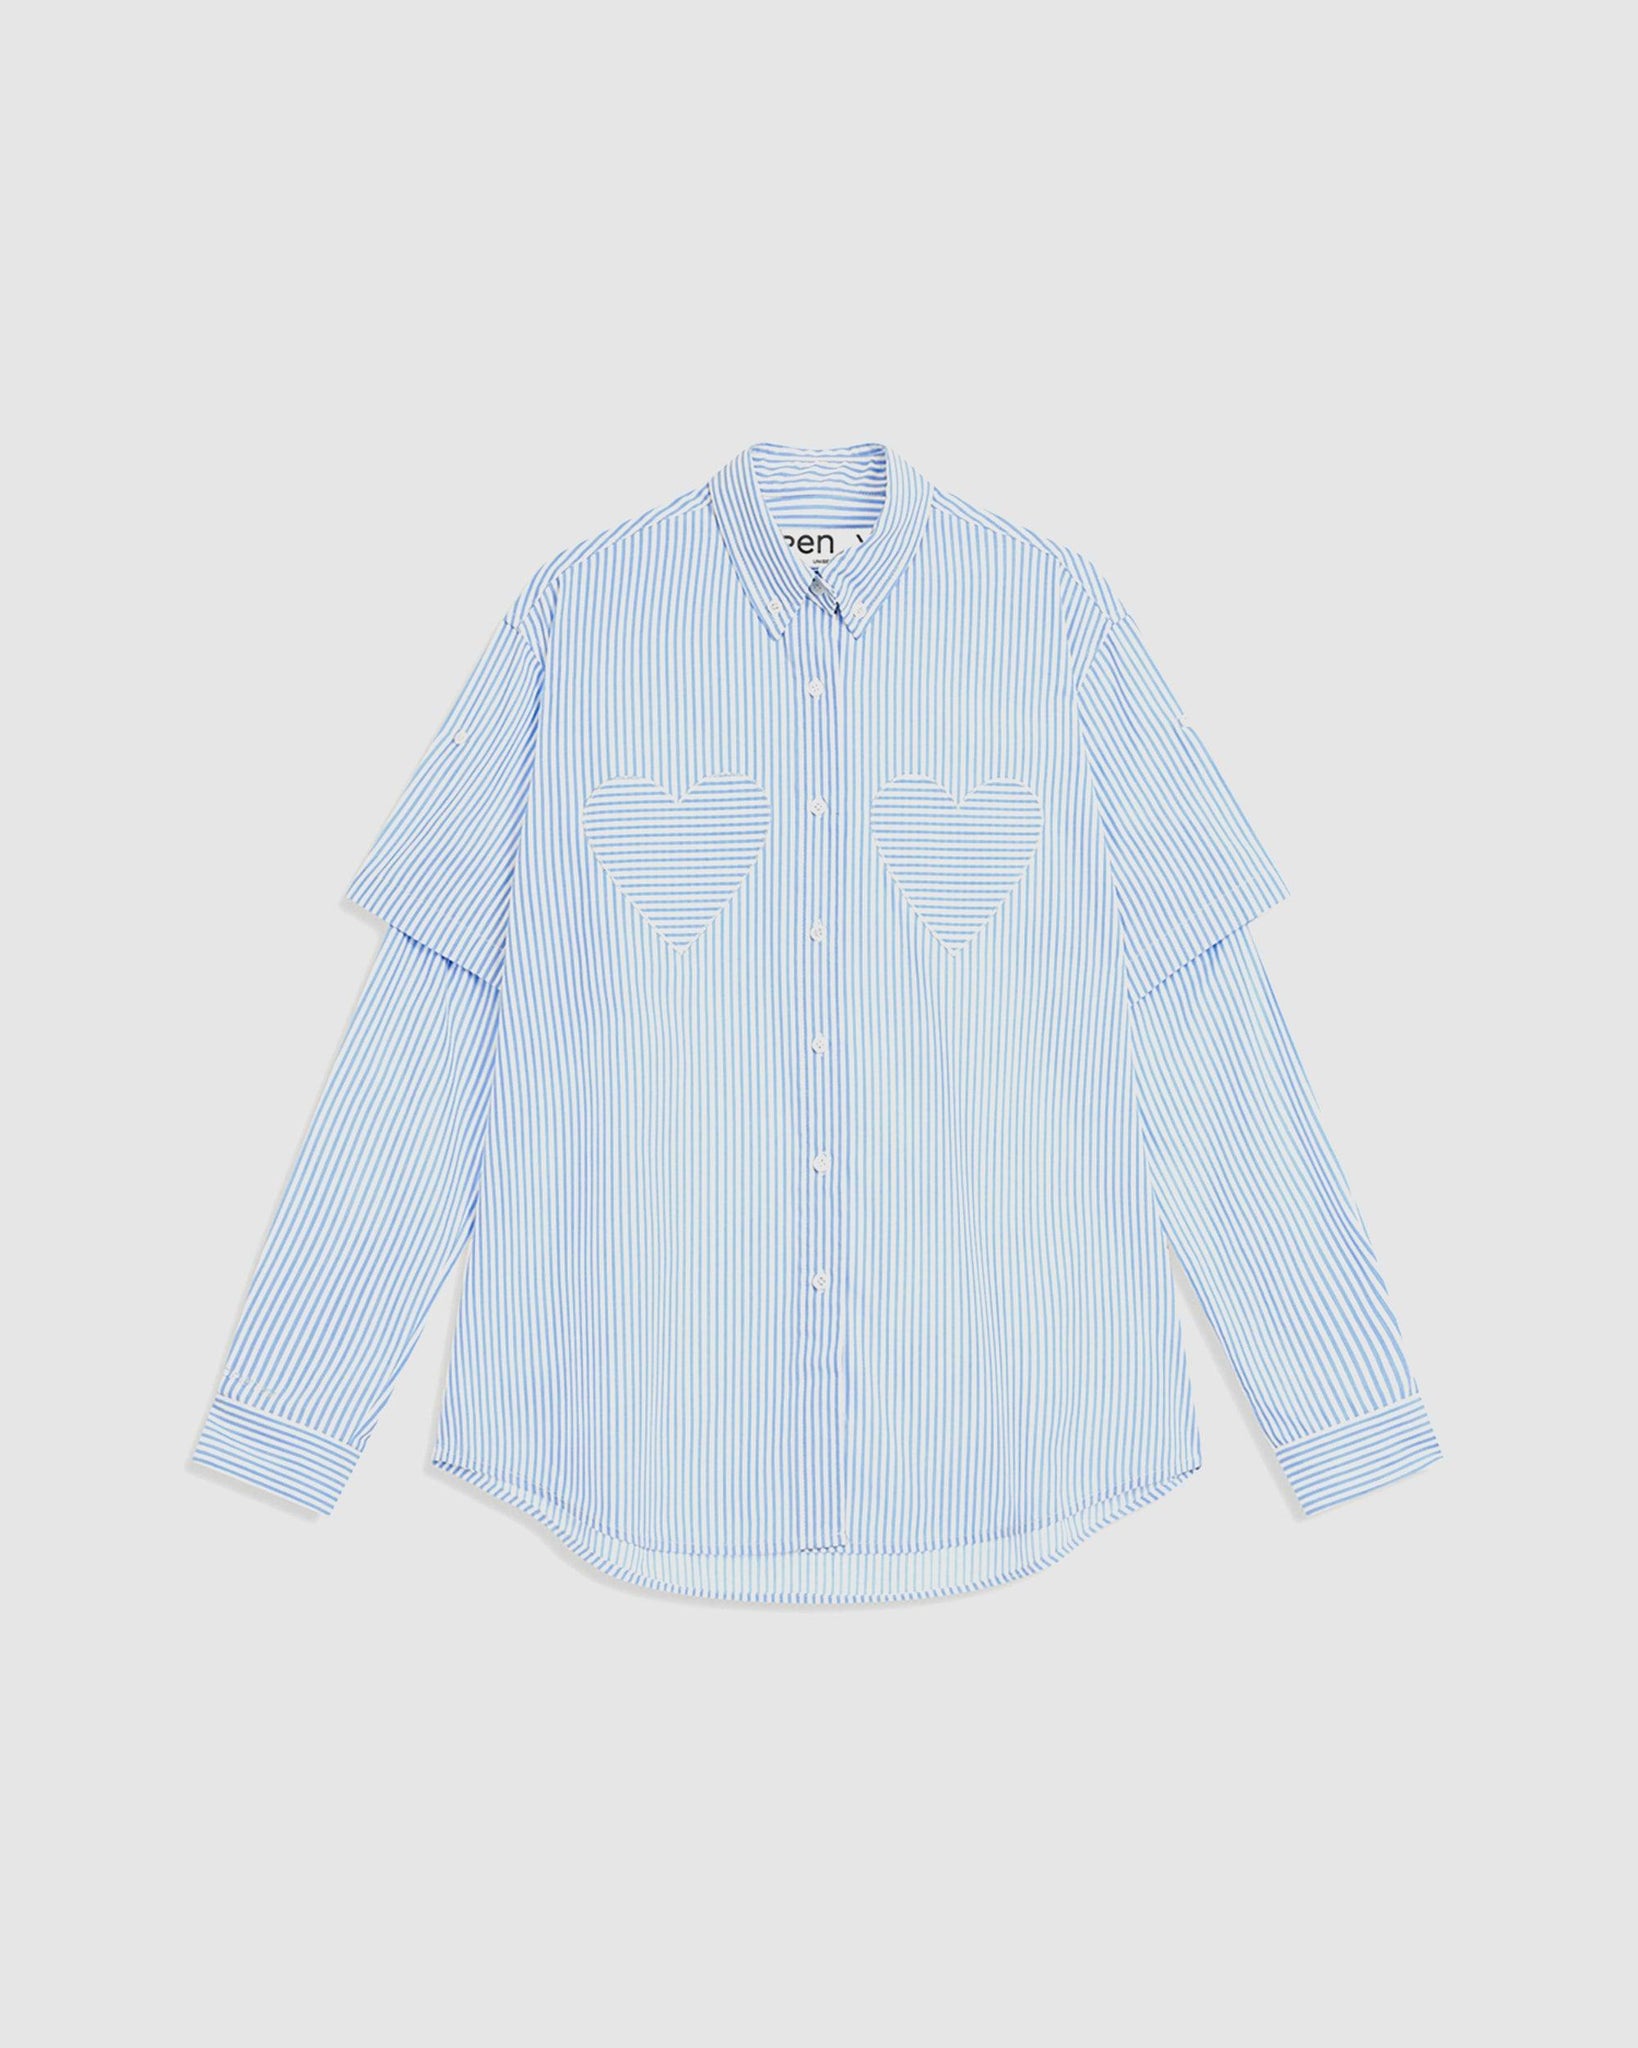 Woven Sleeve Protector Shirt - {{ collection.title }} - Chinatown Country Club 